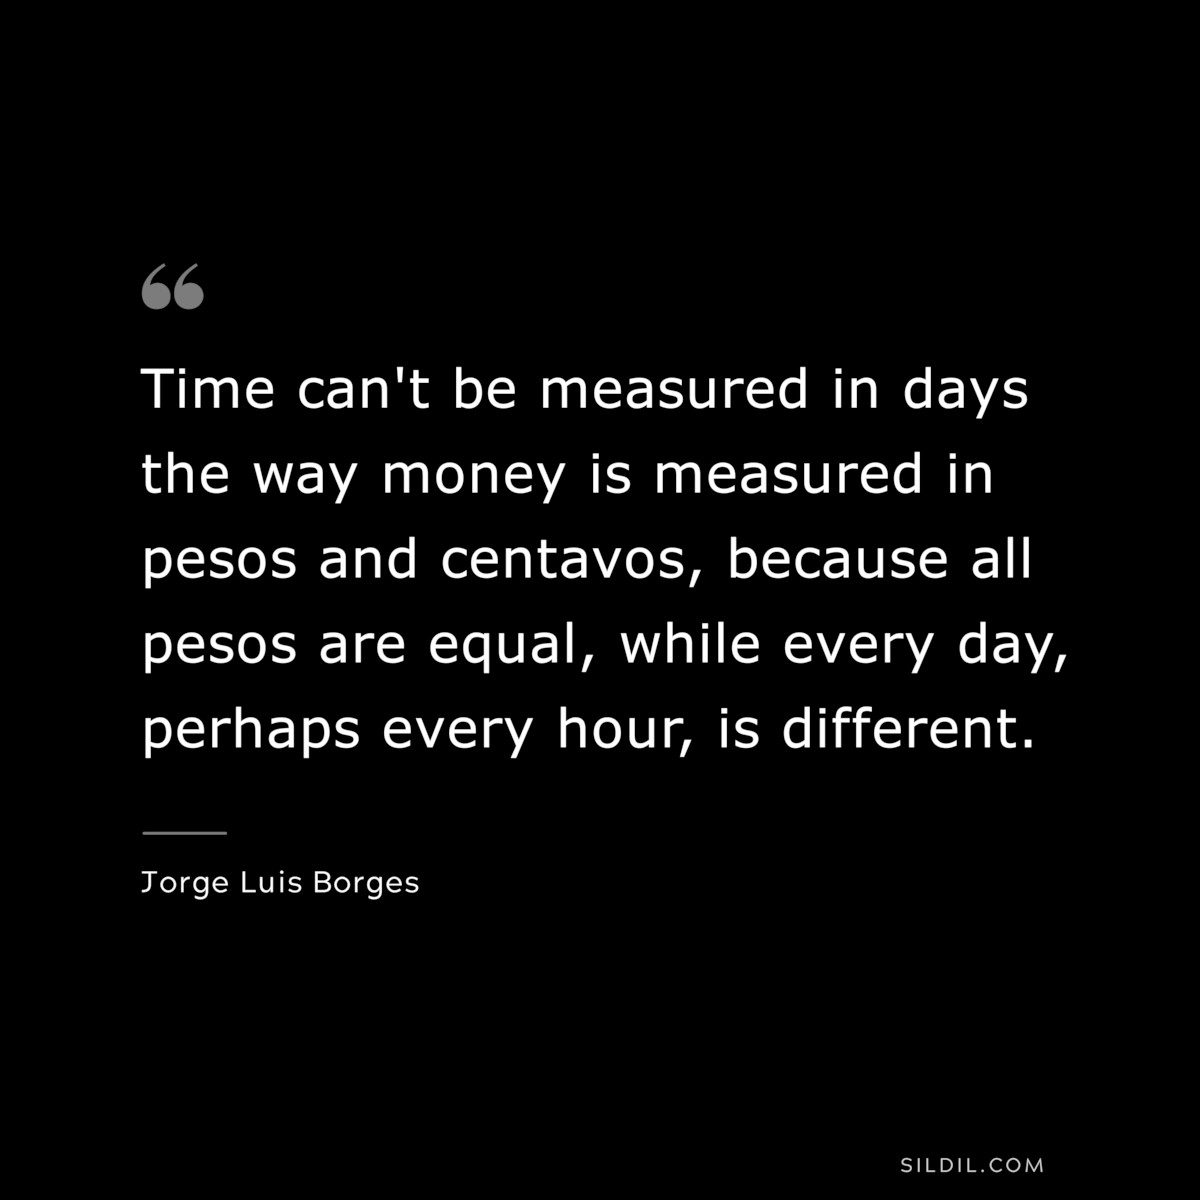 Time can't be measured in days the way money is measured in pesos and centavos, because all pesos are equal, while every day, perhaps every hour, is different. ― Jorge Luis Borges